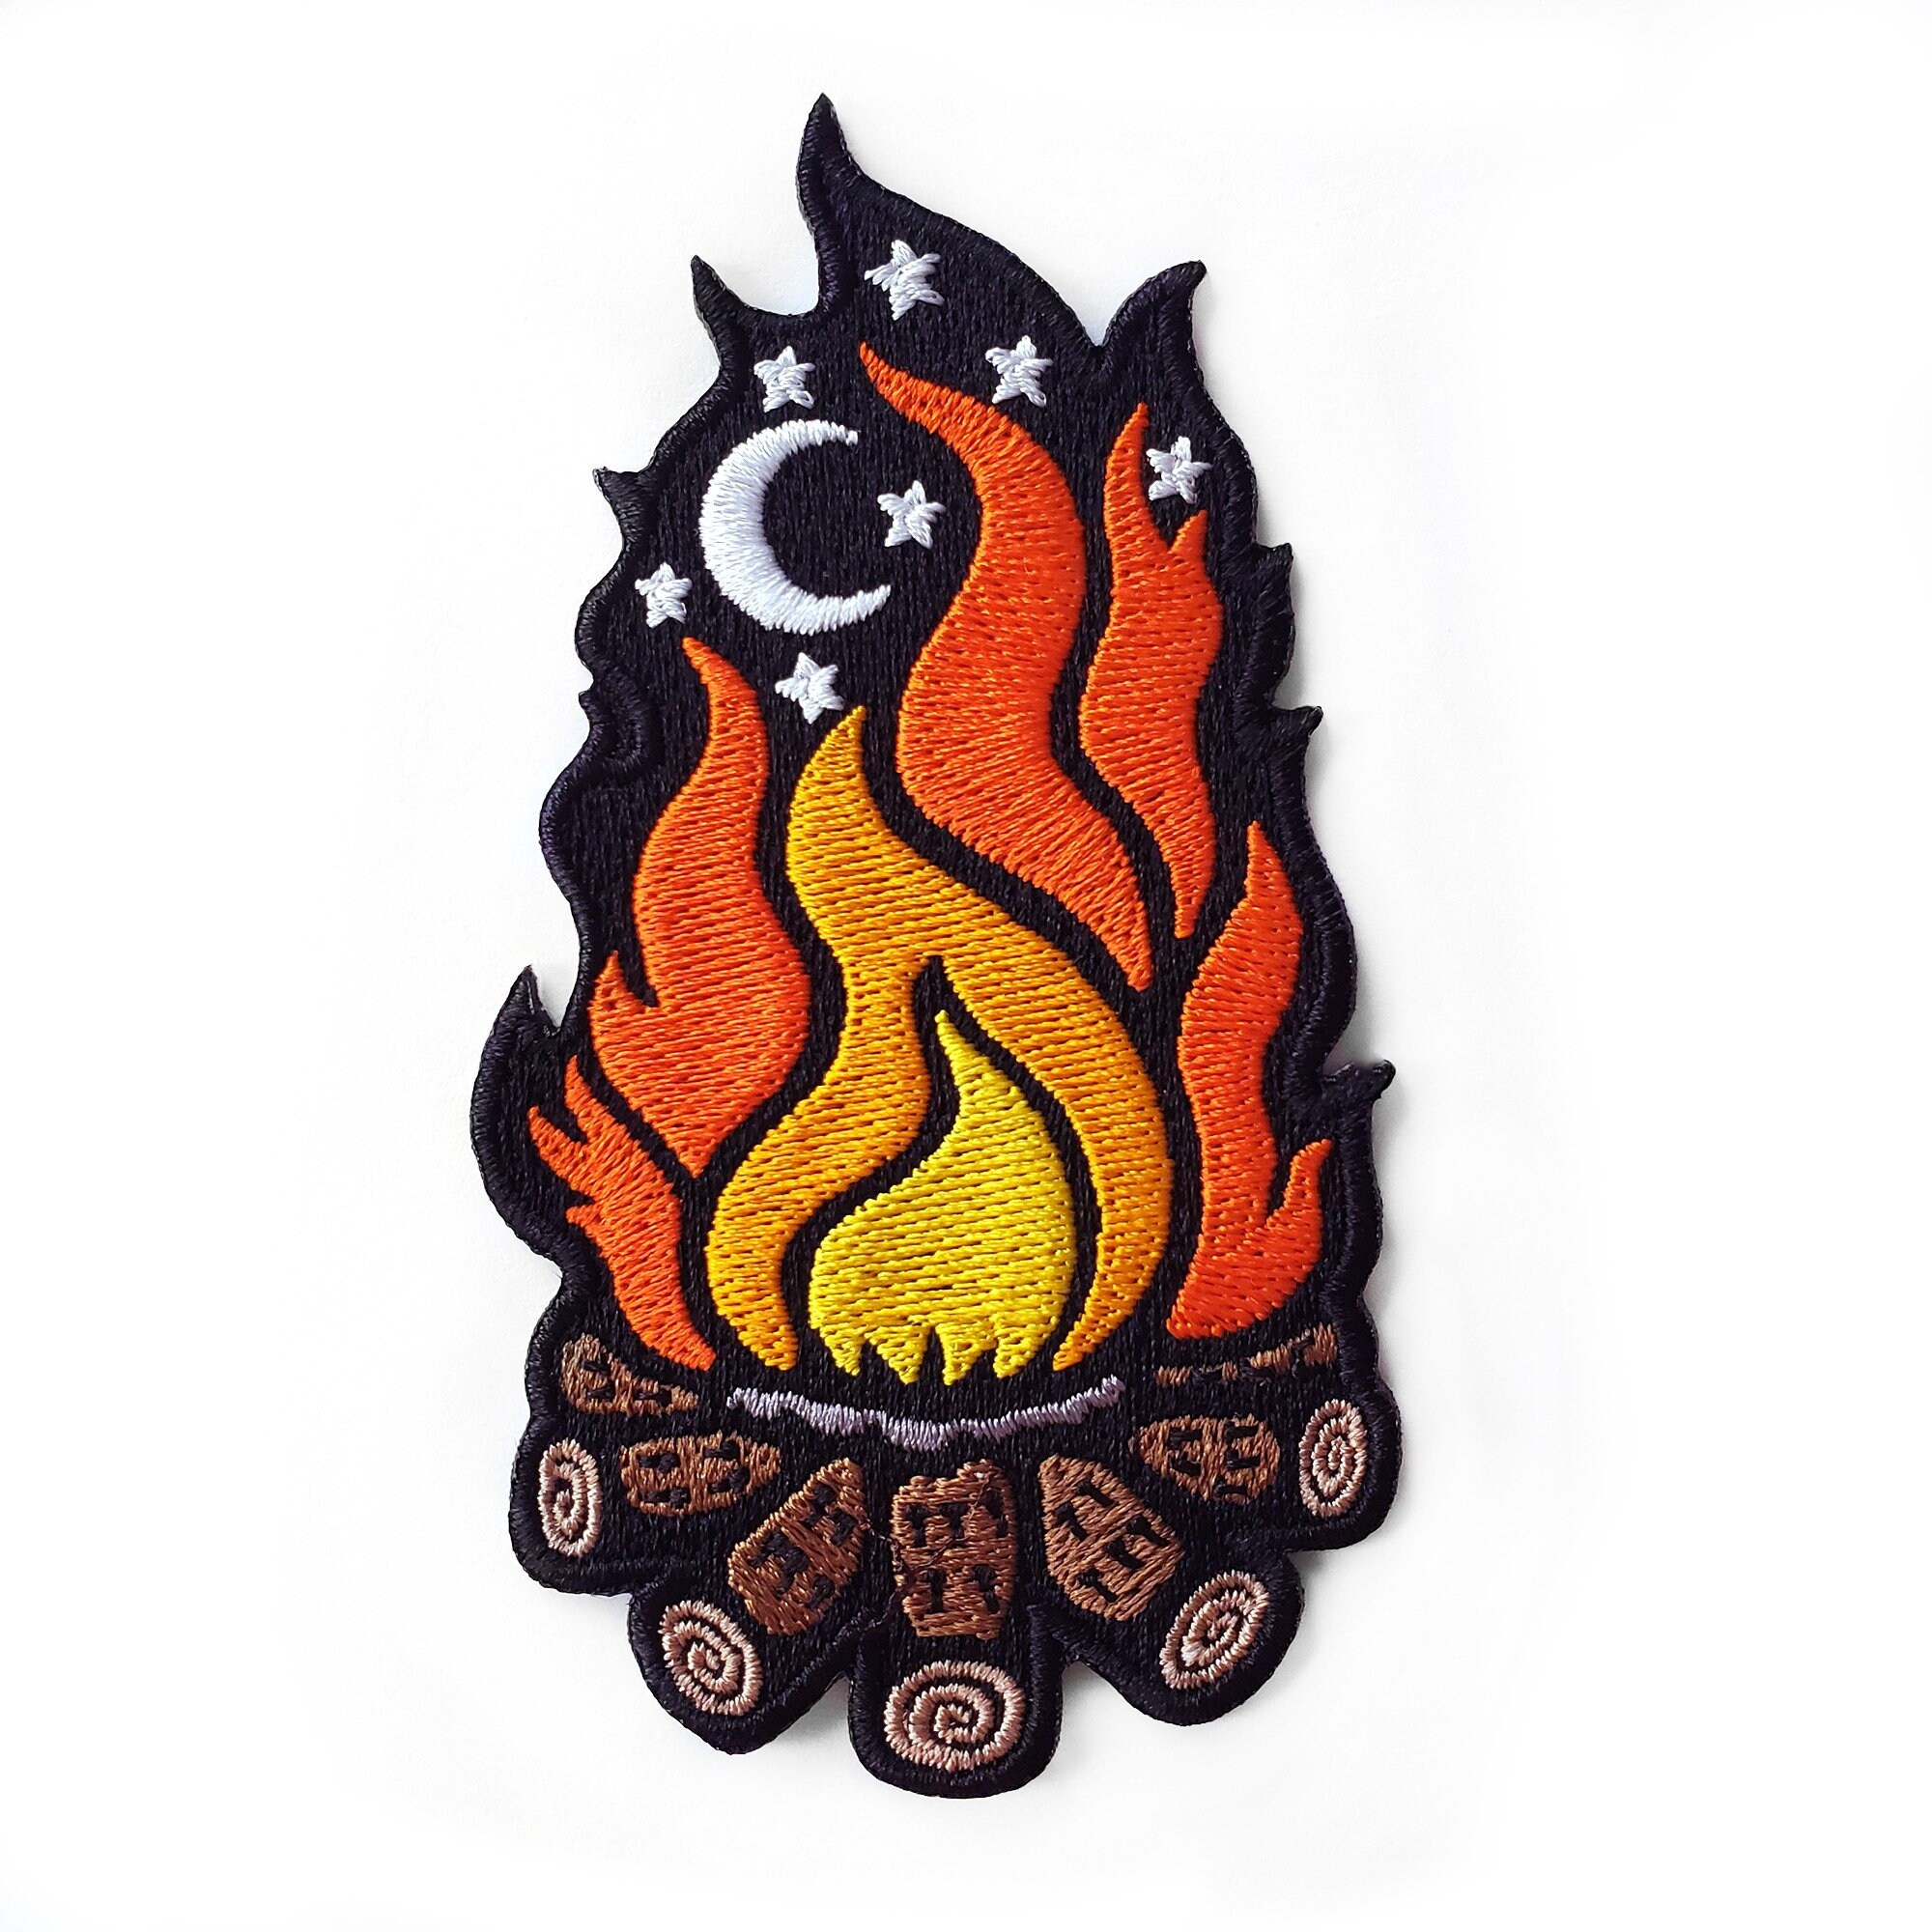 New Heart Barbed Wire Flames Fire Gothic Embroidered Biker Iron On Patch